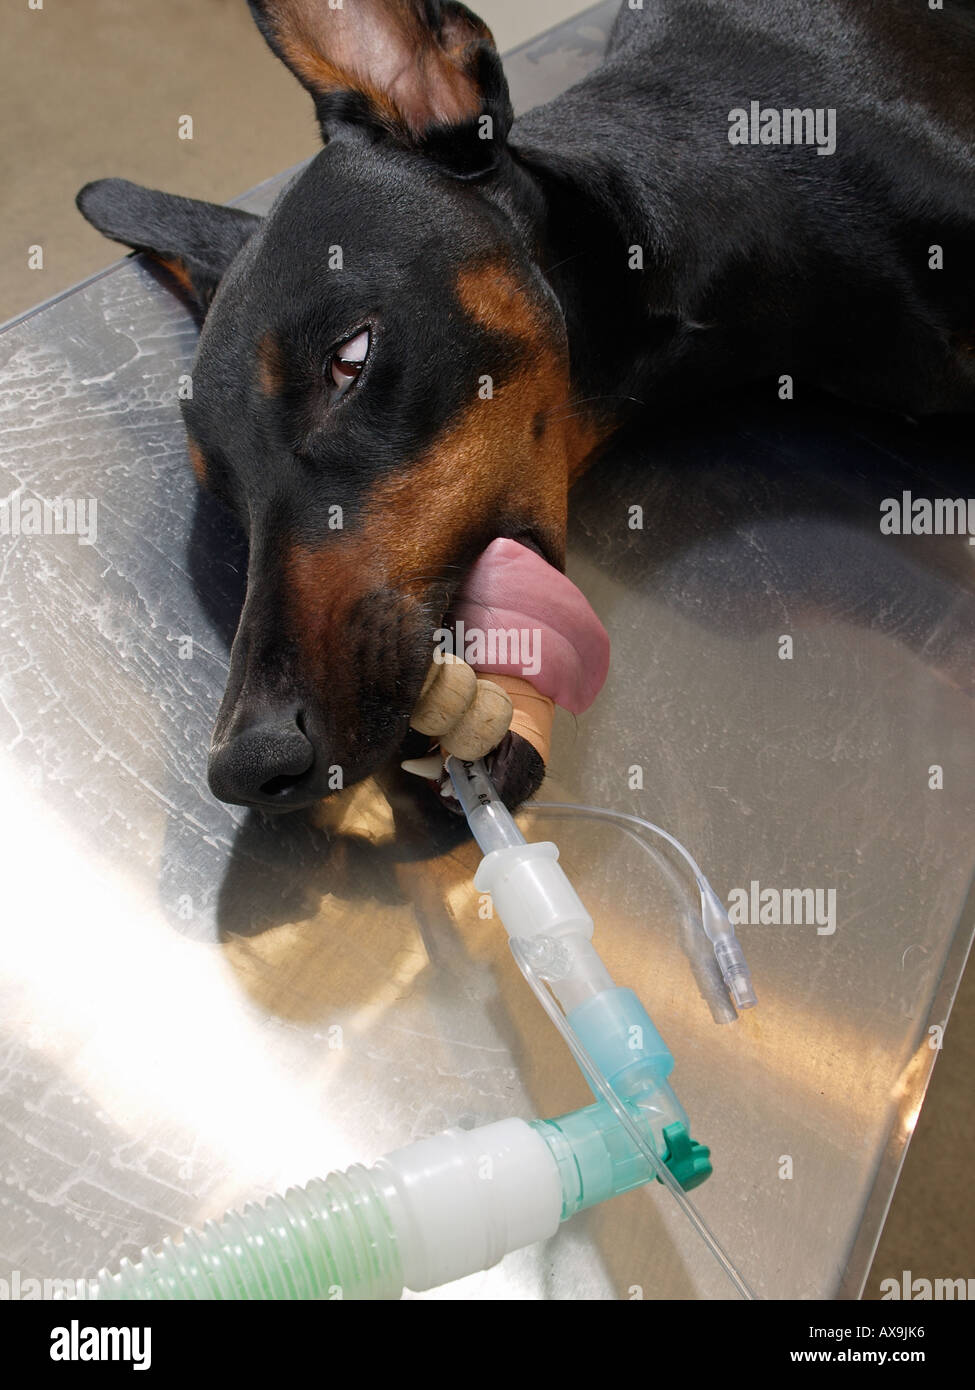 Knocked out and intubated Doberman Pinscher dog on operating table anaestesia veterinarian medical prepared for operation Stock Photo